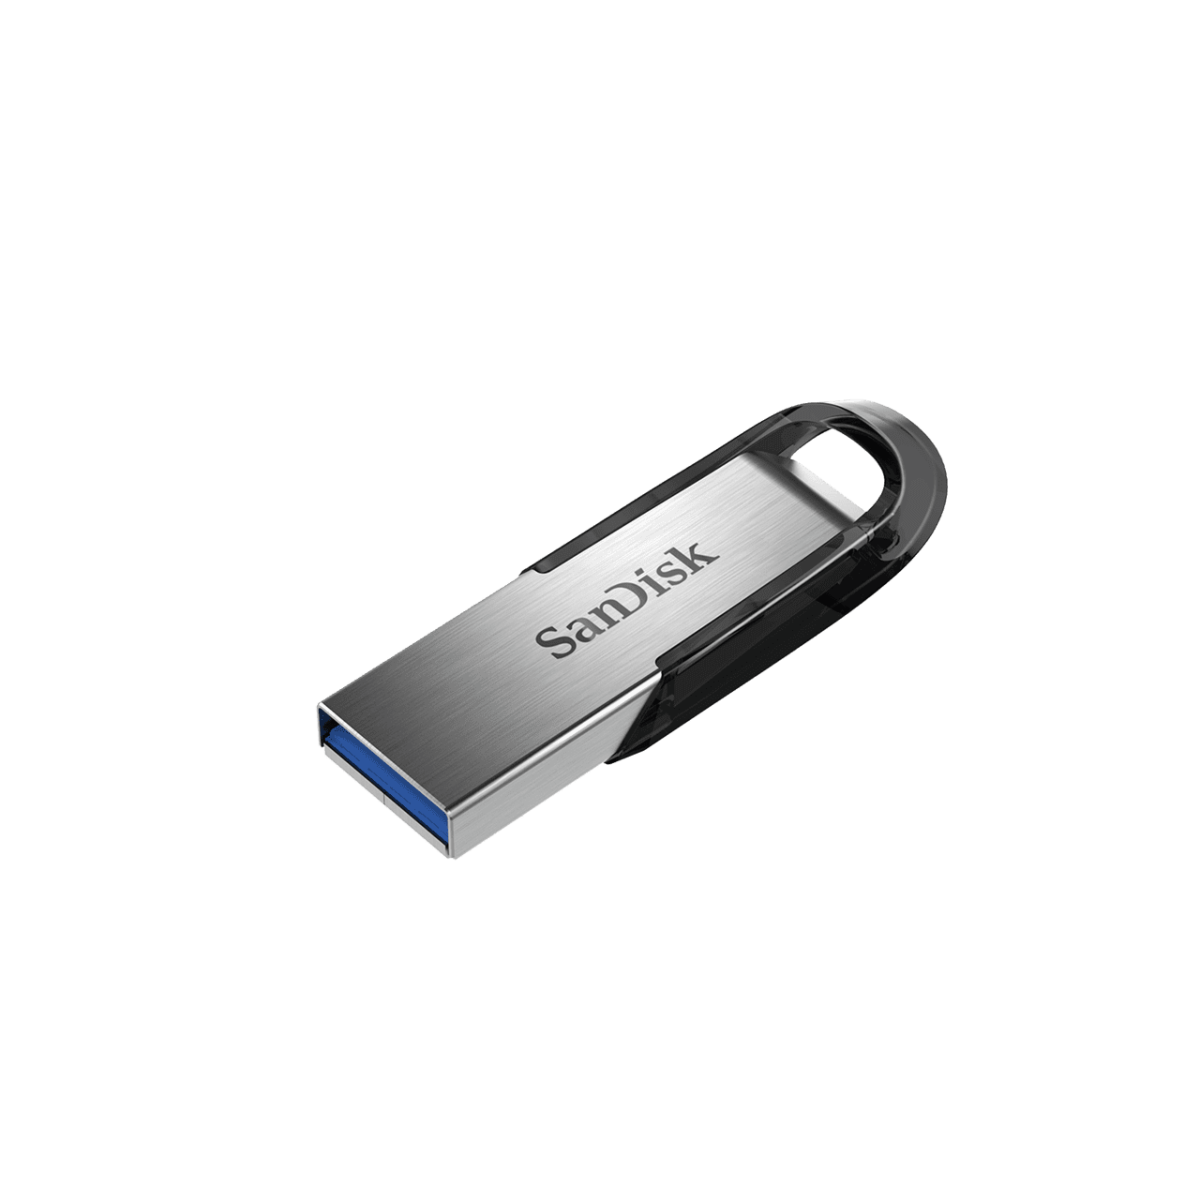 Ultra Flair Usb 3 0 Right 2.Png.thumb .1280.1280 Sandisk &Amp;Lt;Div Class=&Amp;Quot;Inheritpara Mb-4&Amp;Quot;&Amp;Gt; The Sandisk Ultra Flair™ Usb 3.0 Flash Drive Moves Your Files Fast. Spend Less Time Waiting To Transfer Files And Enjoy High-Speed Usb 3.0 Performance Of Up To 150Mb/S&Amp;Lt;A Class=&Amp;Quot;Disclosure&Amp;Quot; Href=&Amp;Quot;Https://Shop.westerndigital.com/Products/Usb-Flash-Drives/Sandisk-Ultra-Flair-Usb-3-0#Disclosures&Amp;Quot; Target=&Amp;Quot;_Self&Amp;Quot; Rel=&Amp;Quot;Noopener Noreferrer&Amp;Quot; Aria-Labelledby=&Amp;Quot;Disclosures&Amp;Quot;&Amp;Gt;&Amp;Lt;Sup&Amp;Gt;**&Amp;Lt;/Sup&Amp;Gt;&Amp;Lt;/A&Amp;Gt;. Its Durable And Sleek Metal Casing Is Tough Enough To Handle Knocks With Style. And, With Password Protection, You Can Rest Assured That Your Private Files Stay Private&Amp;Lt;A Class=&Amp;Quot;Disclosure&Amp;Quot; Href=&Amp;Quot;Https://Shop.westerndigital.com/Products/Usb-Flash-Drives/Sandisk-Ultra-Flair-Usb-3-0#Disclosures&Amp;Quot; Target=&Amp;Quot;_Self&Amp;Quot; Rel=&Amp;Quot;Noopener Noreferrer&Amp;Quot; Aria-Labelledby=&Amp;Quot;Disclosures&Amp;Quot;&Amp;Gt;&Amp;Lt;Sup&Amp;Gt;1&Amp;Lt;/Sup&Amp;Gt;&Amp;Lt;/A&Amp;Gt;. Store Your Files In Style With The Sandisk Ultra Flair Usb 3.0 Flash Drive. &Amp;Lt;Strong&Amp;Gt;Warranty&Amp;Lt;/Strong&Amp;Gt; The Sandisk Ultra Flair Usb 3.0 Flash Drive Is Backed By A Five-Year Manufacturer Warranty&Amp;Lt;A Class=&Amp;Quot;Disclosure&Amp;Quot; Href=&Amp;Quot;Https://Shop.westerndigital.com/Products/Usb-Flash-Drives/Sandisk-Ultra-Flair-Usb-3-0#Disclosures&Amp;Quot; Target=&Amp;Quot;_Self&Amp;Quot; Rel=&Amp;Quot;Noopener Noreferrer&Amp;Quot; Aria-Labelledby=&Amp;Quot;Disclosures&Amp;Quot;&Amp;Gt;&Amp;Lt;Sup&Amp;Gt;2&Amp;Lt;/Sup&Amp;Gt;&Amp;Lt;/A&Amp;Gt; &Amp;Lt;/Div&Amp;Gt; Sandisk Sandisk Ultra Flair Usb 3.0 Flash Drive (32Gb)